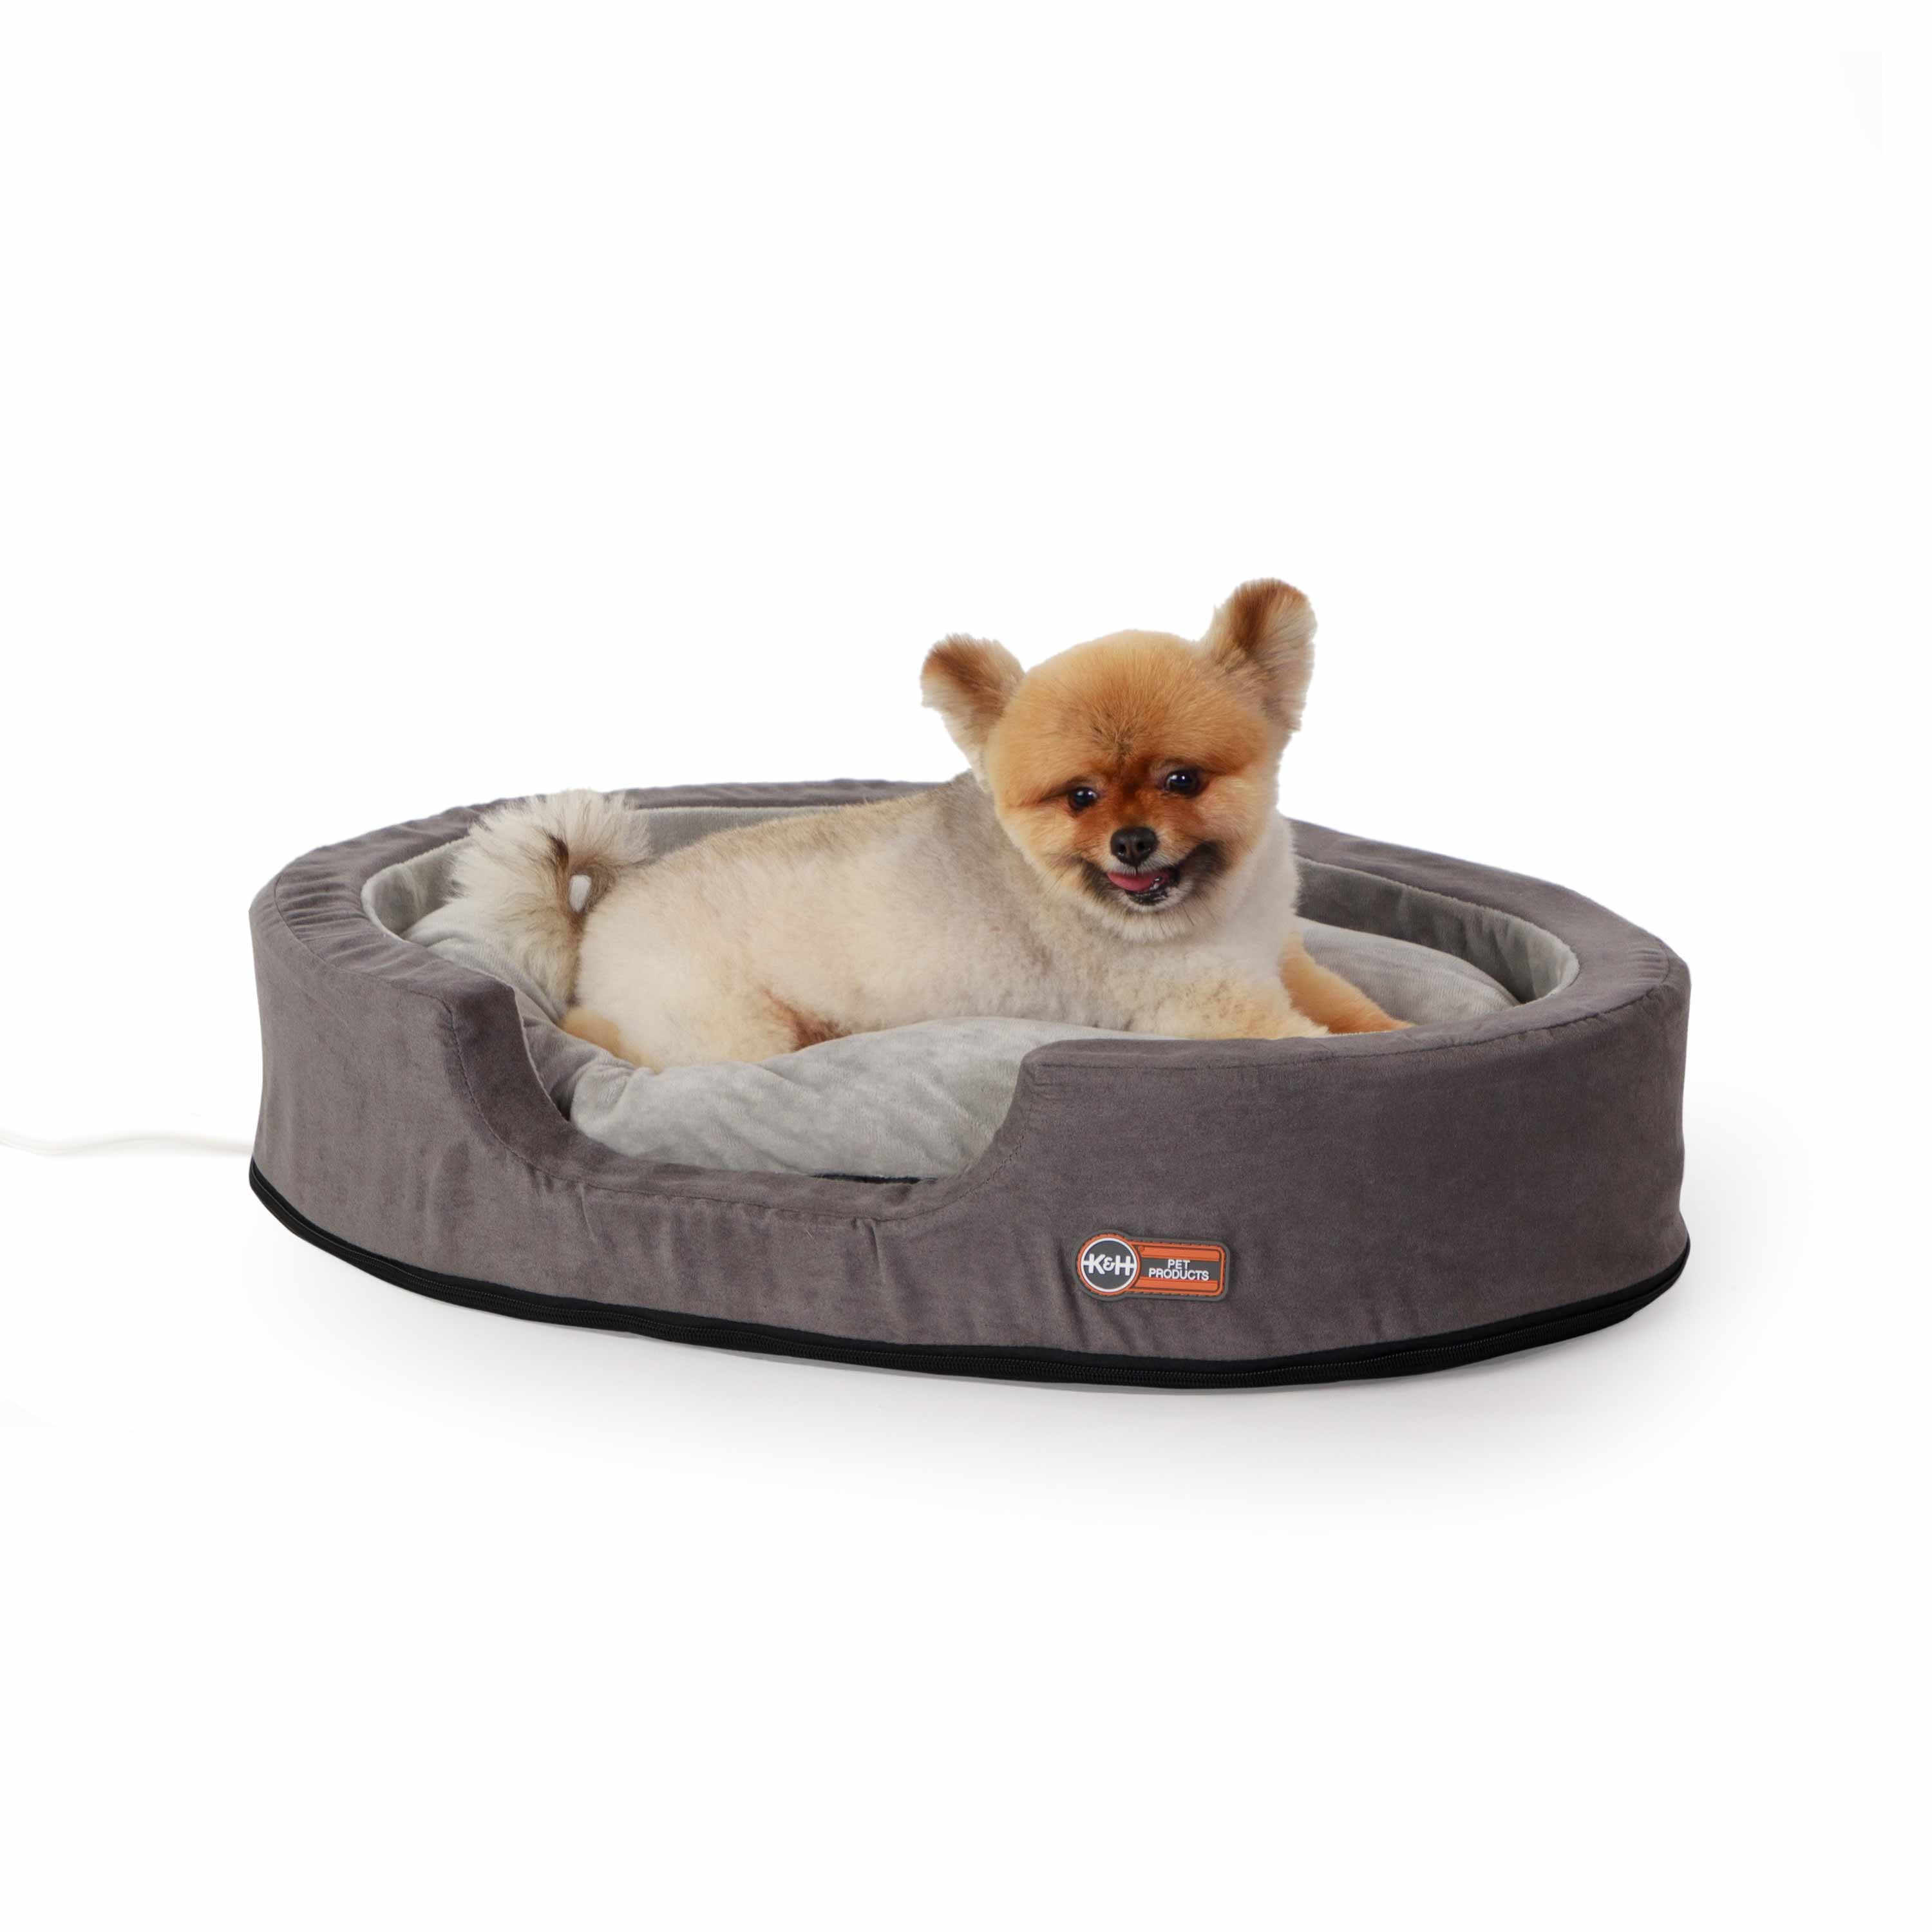 kh100546497 Thermo-Snuggly Sleeper Heated Pet Bed